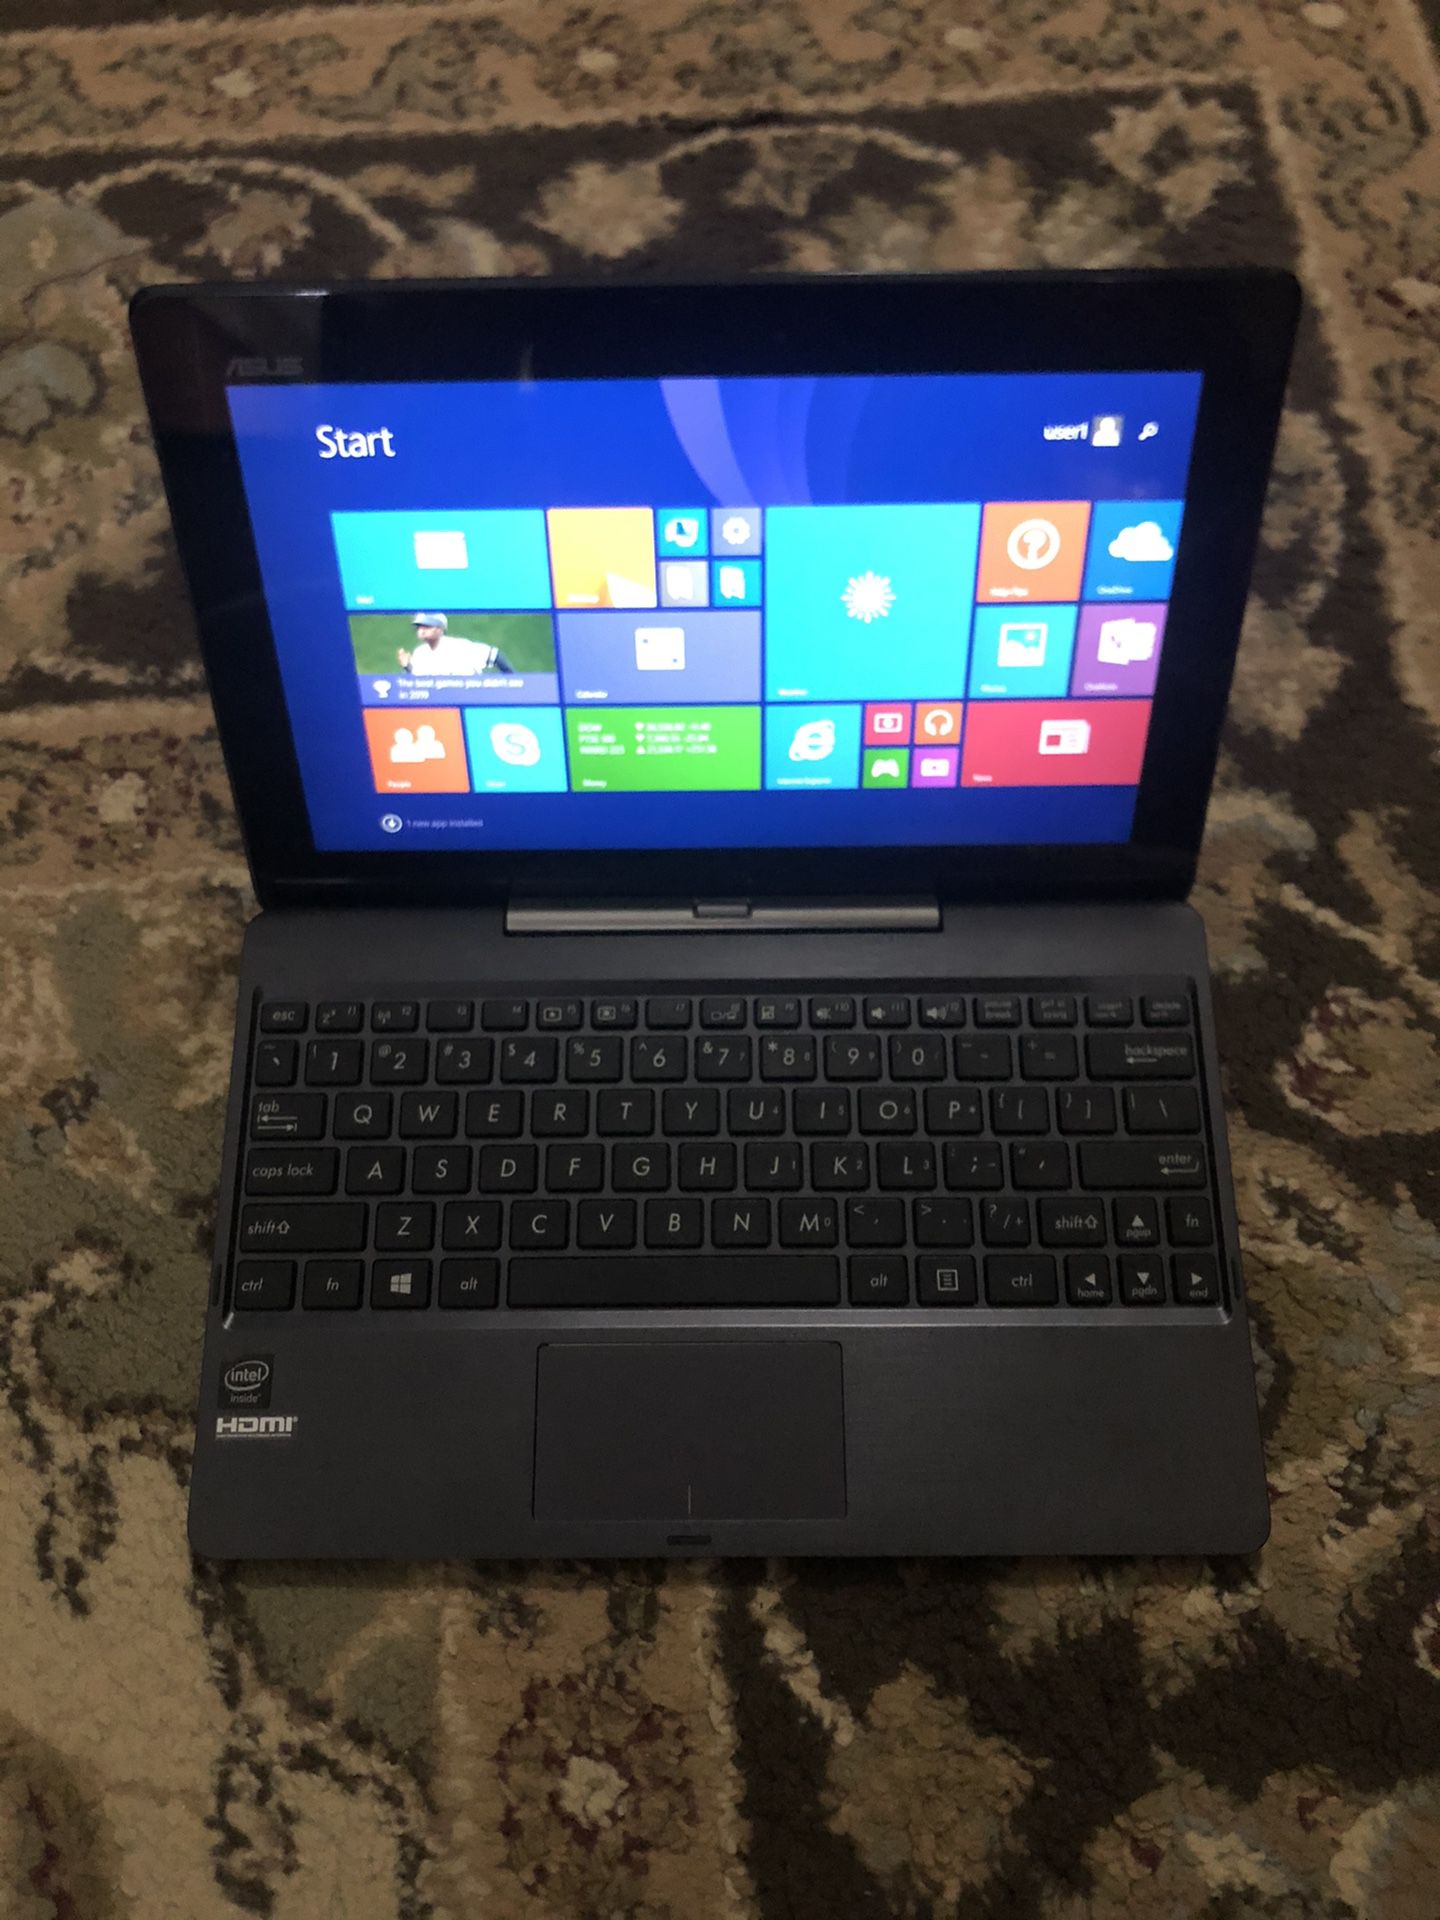 Asus Laptop 2 in 1 with 2gb ram and 64gb ssd